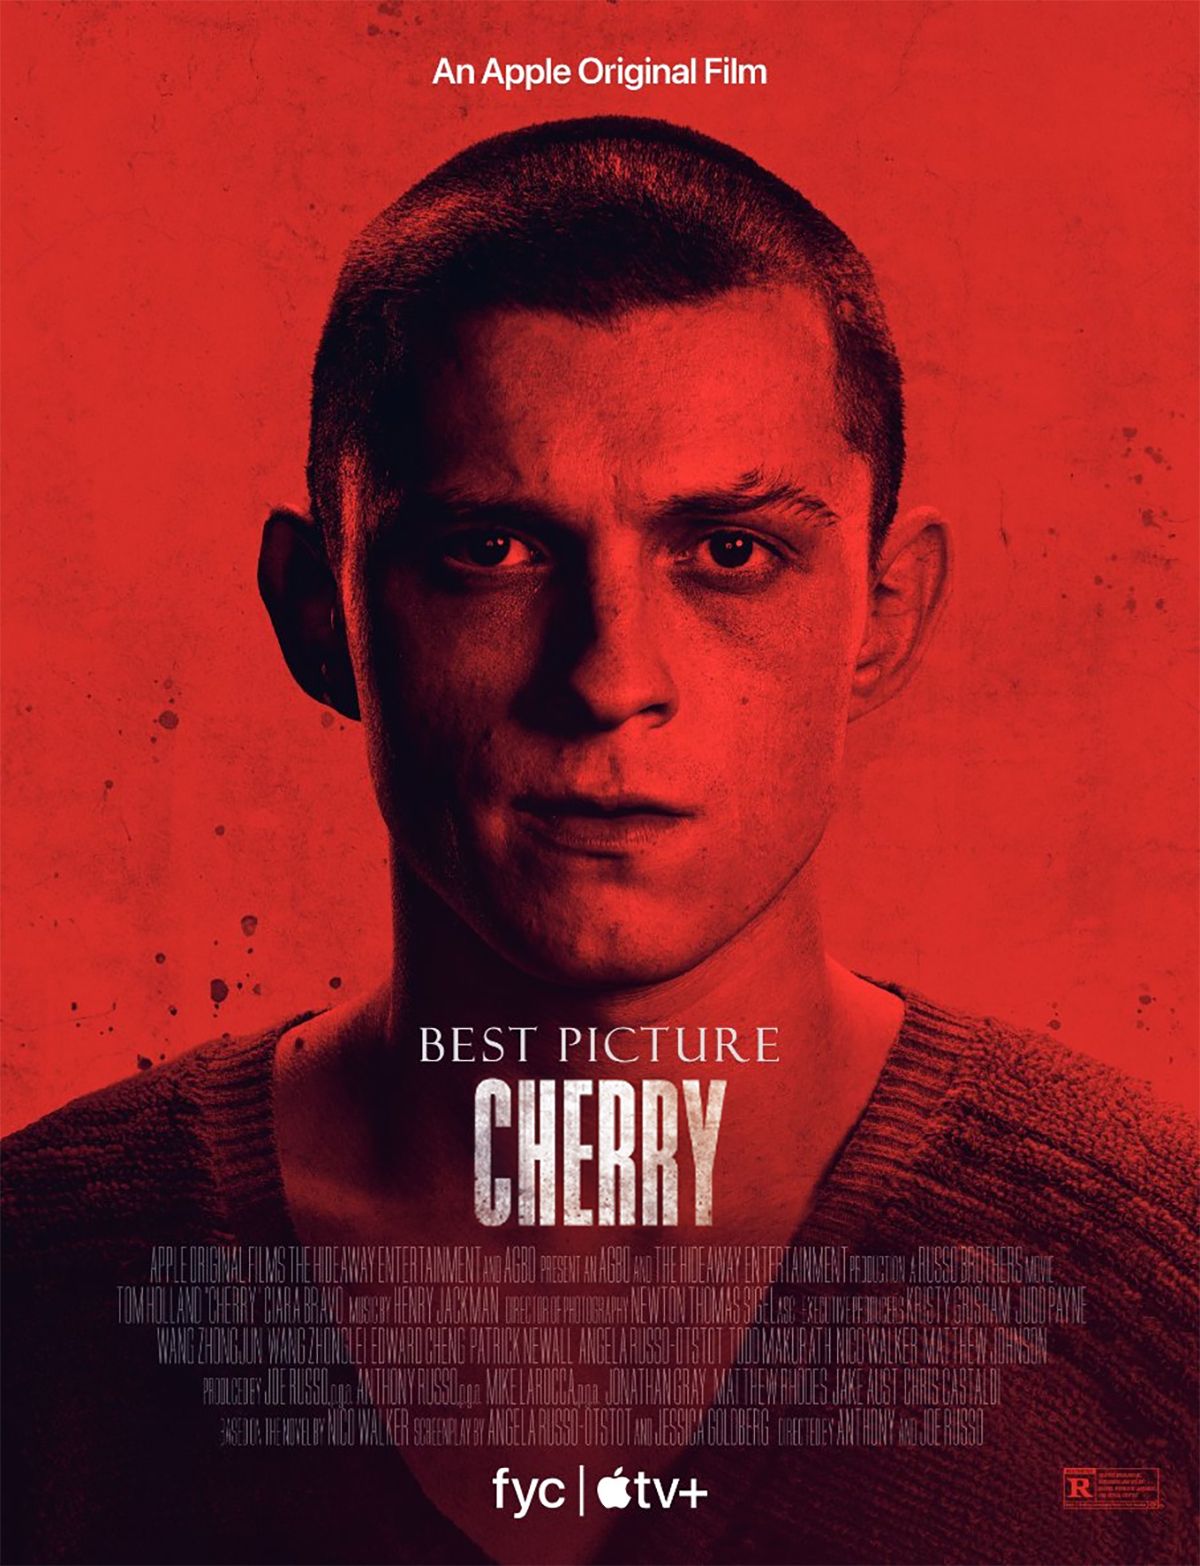 The poster for Cherry starring Tom Holland